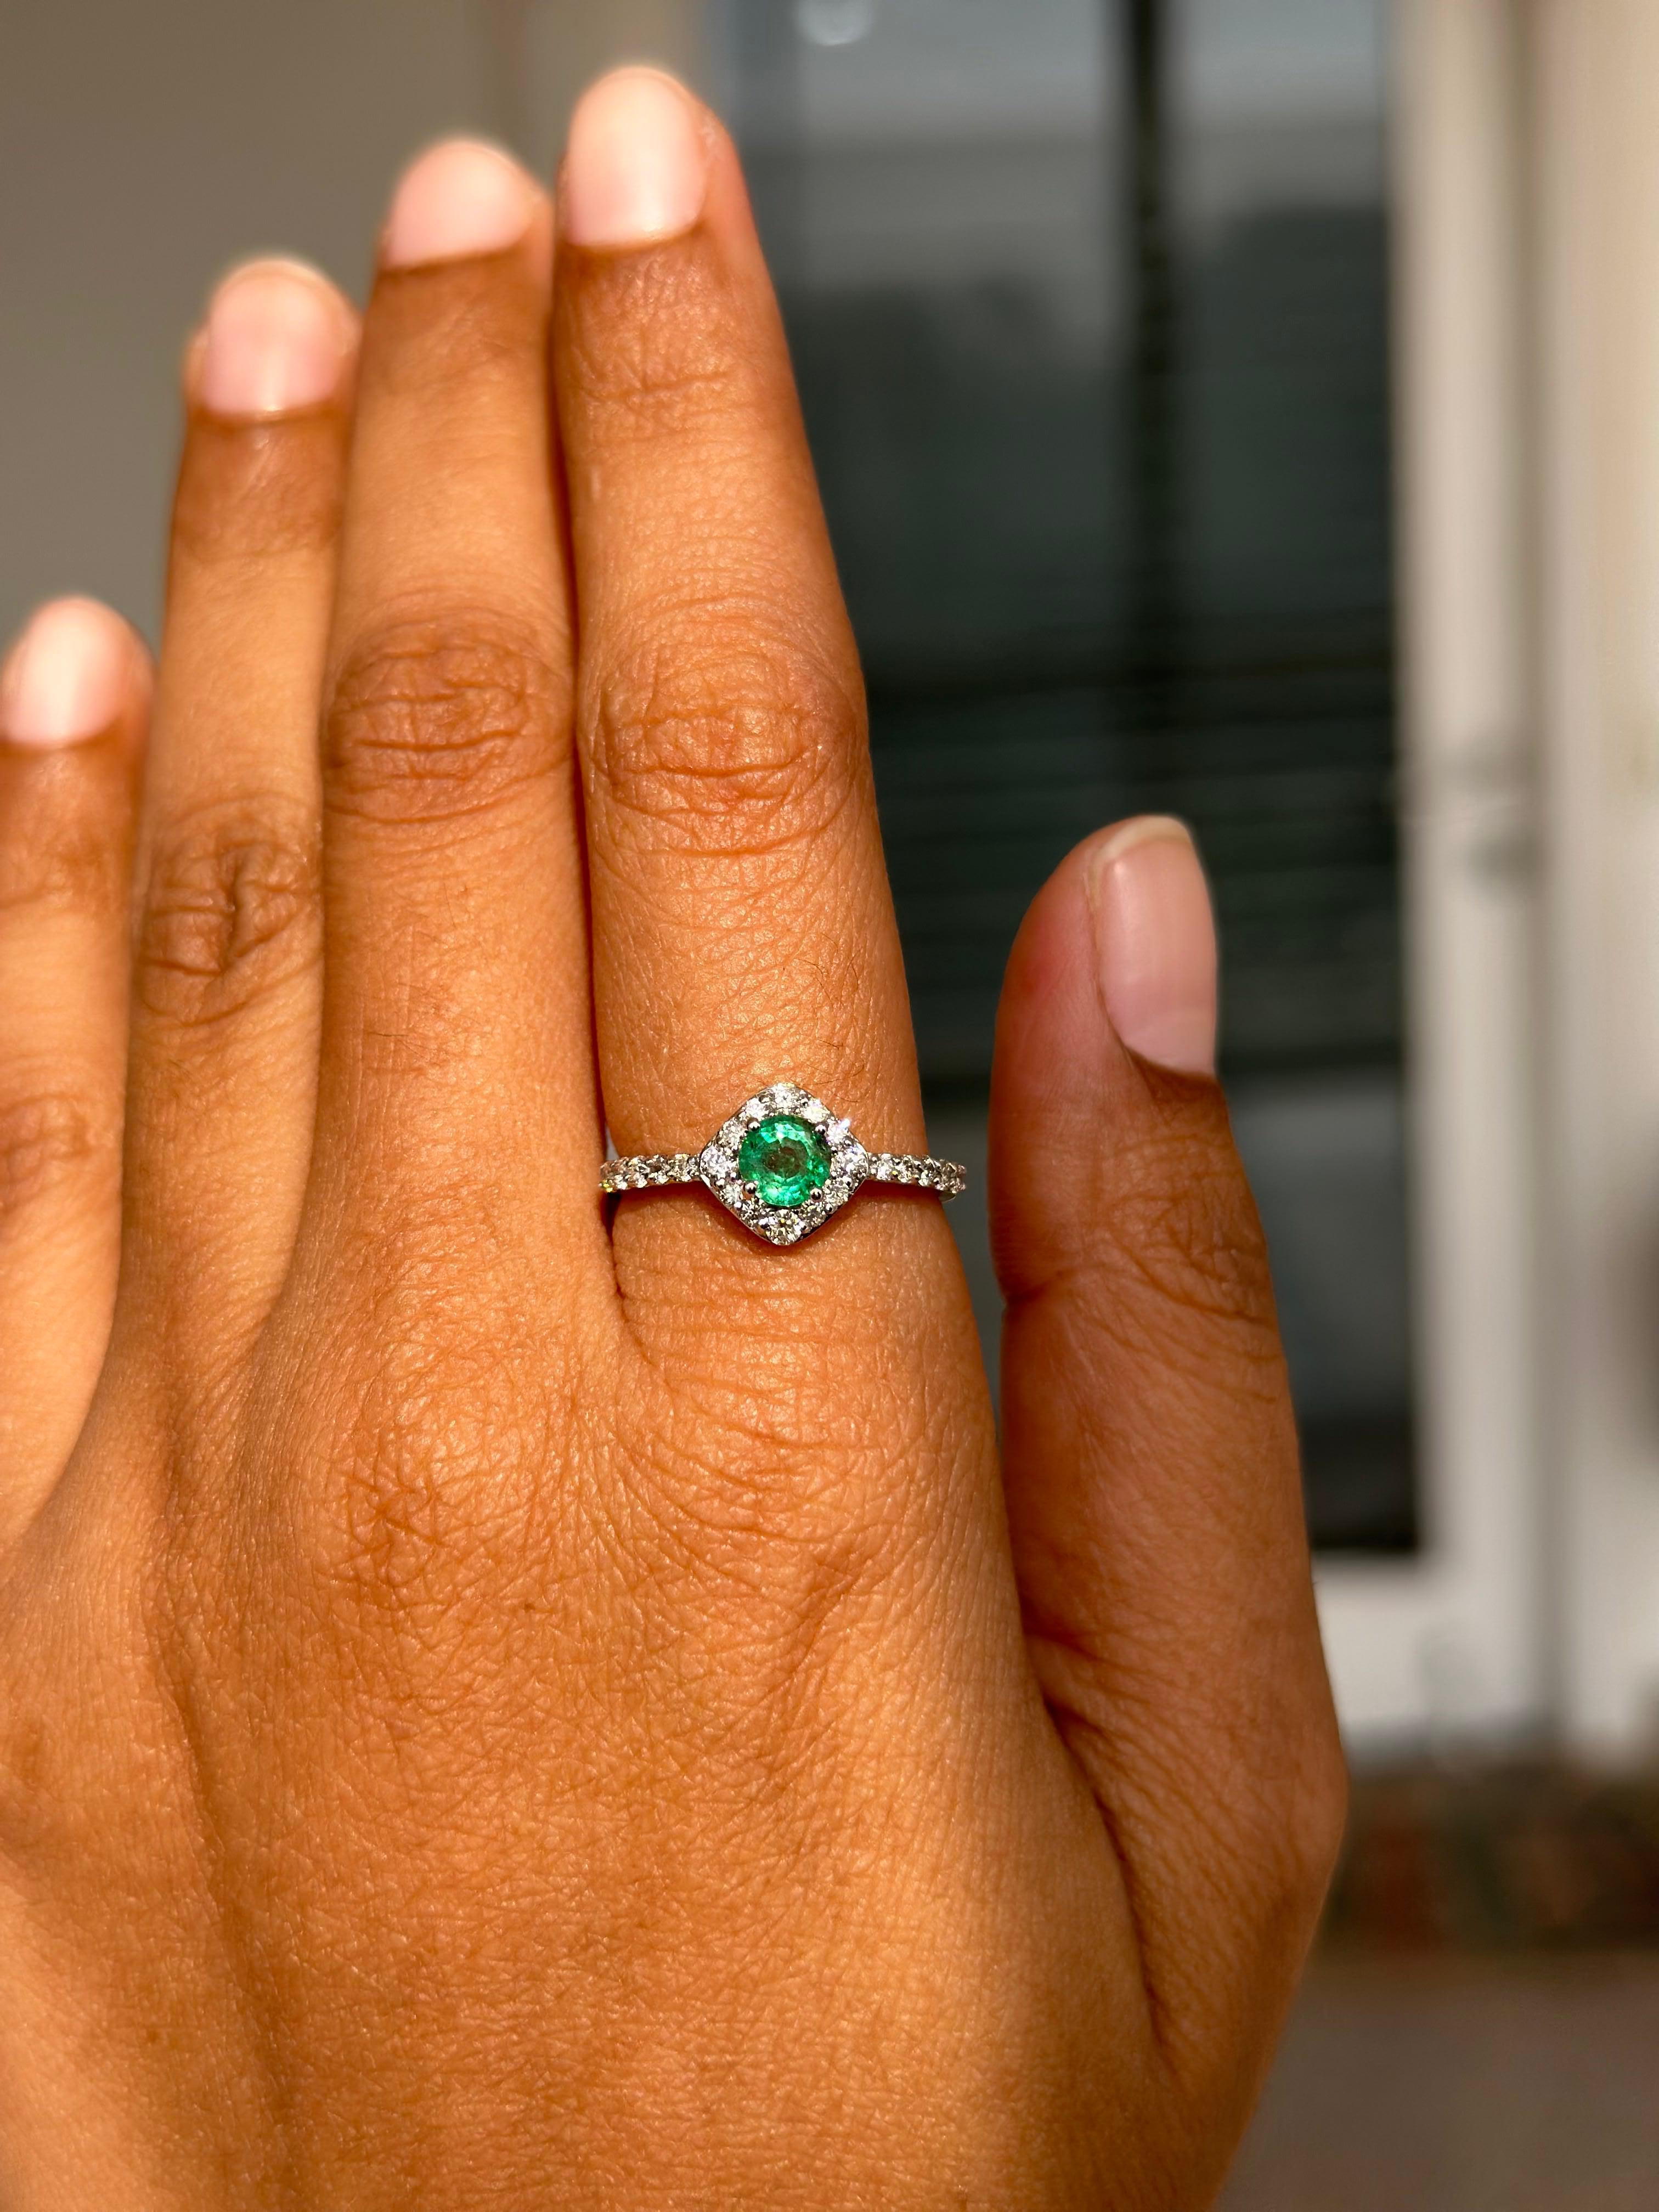 For Sale:  Dainty Halo Diamond Emerald Ring Handcrafted in 14k Solid White Gold 7